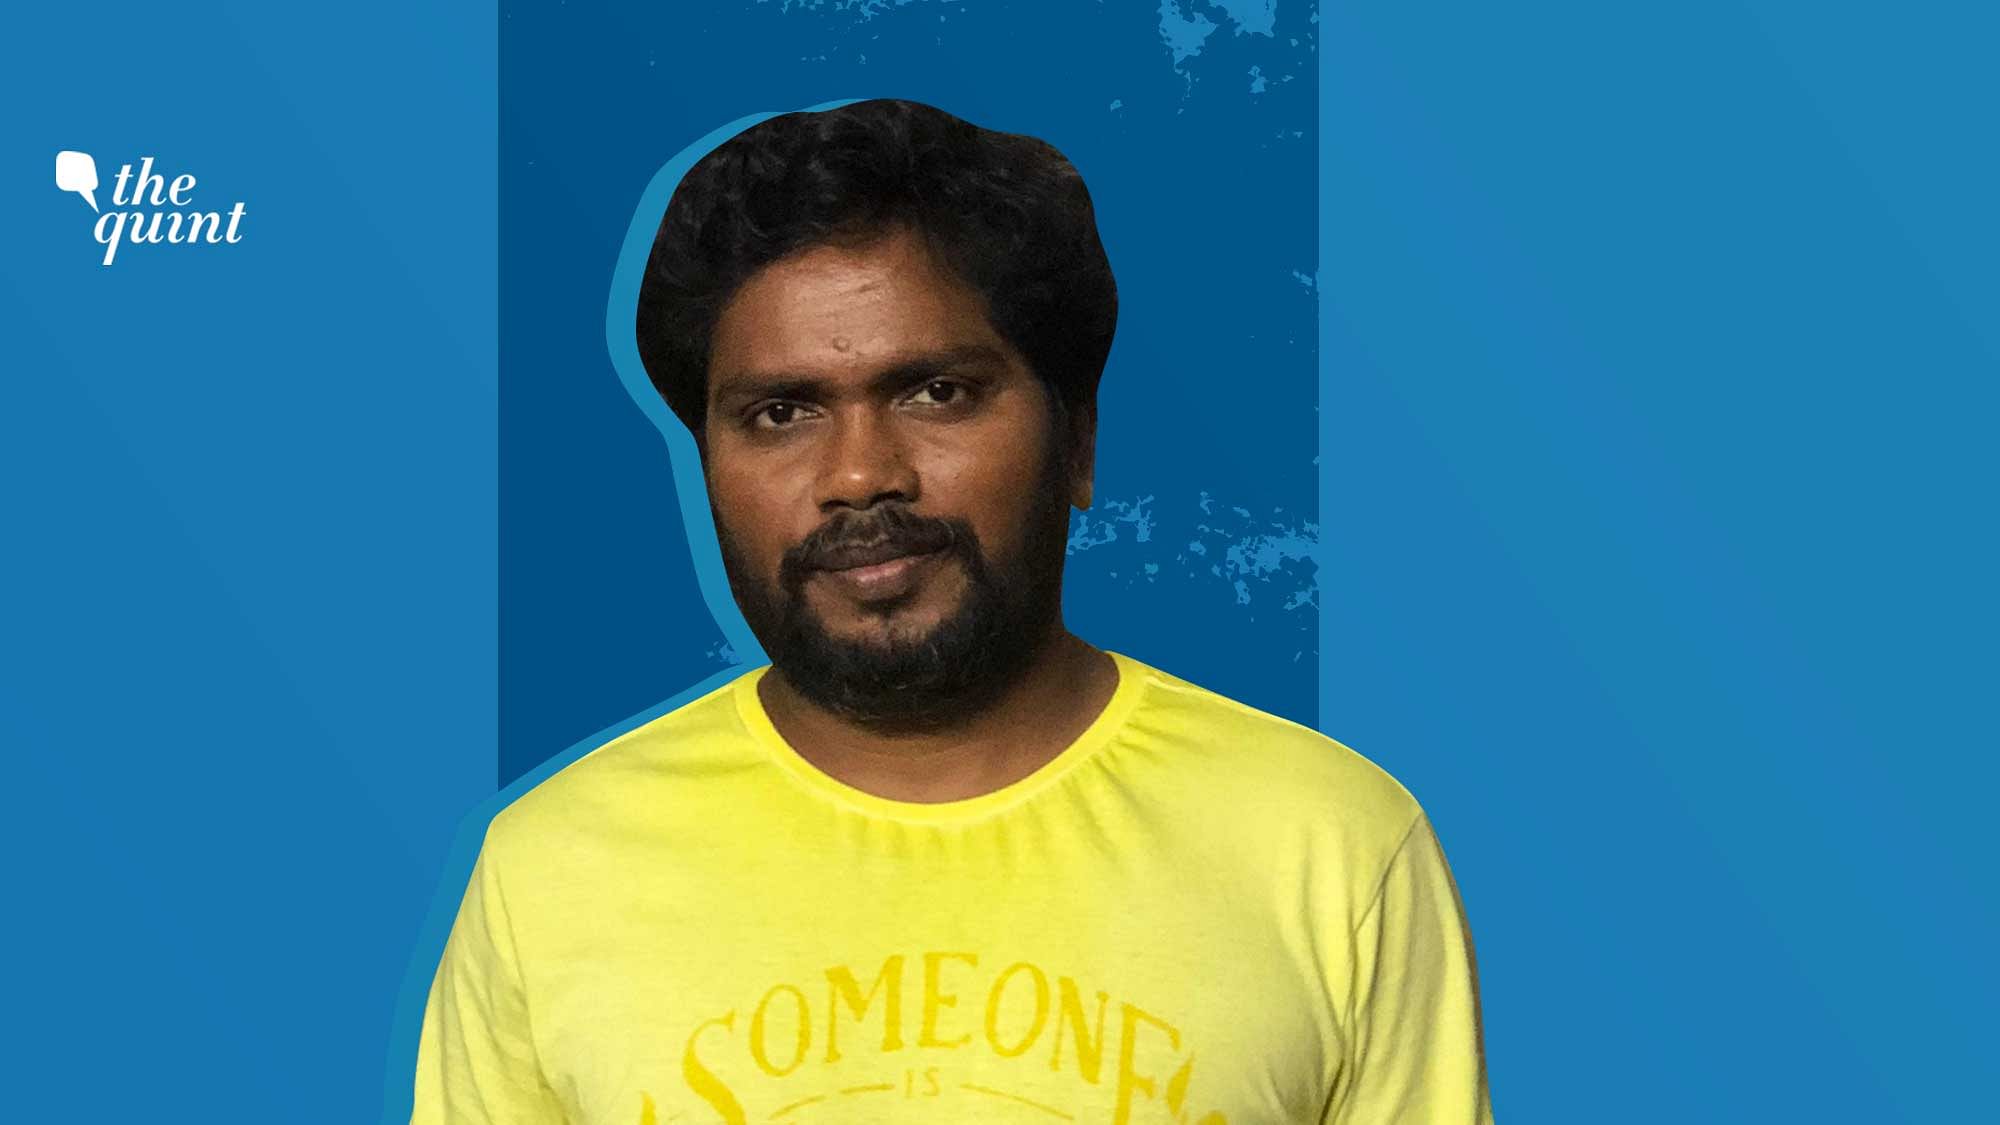 Tamil director Pa Ranjith tweeted in support of the farmers’ protest, on Friday